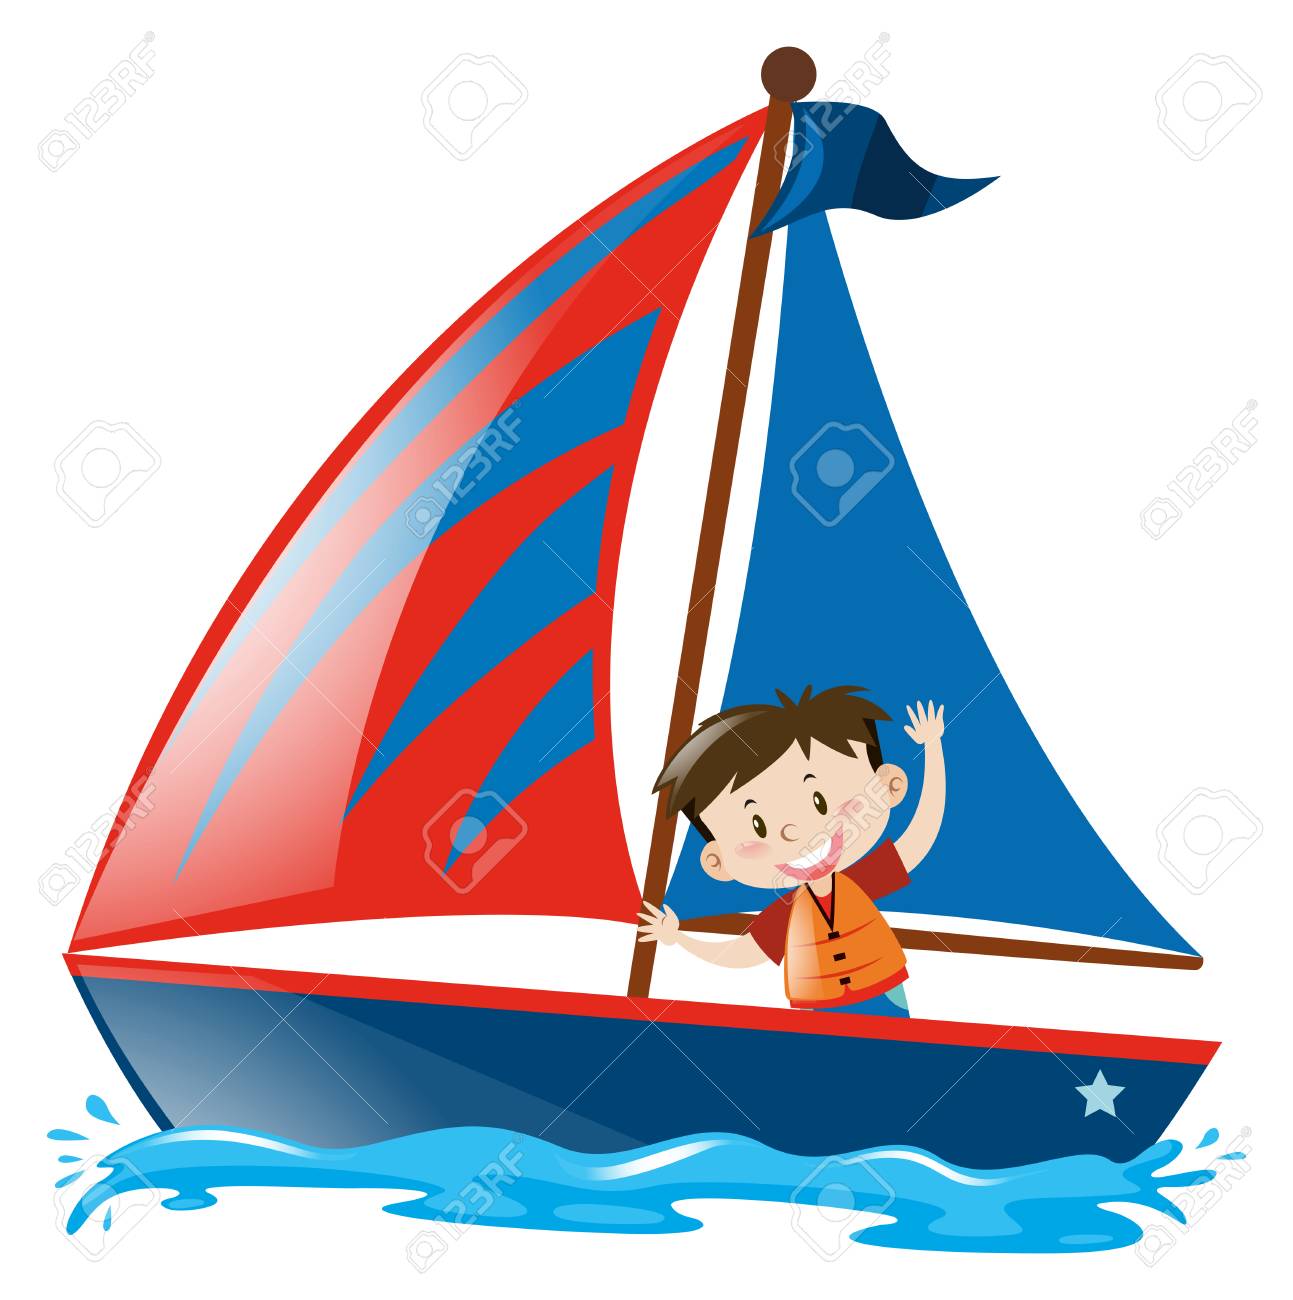 Free Sailing Clipart boy in boat, Download Free Clip Art on